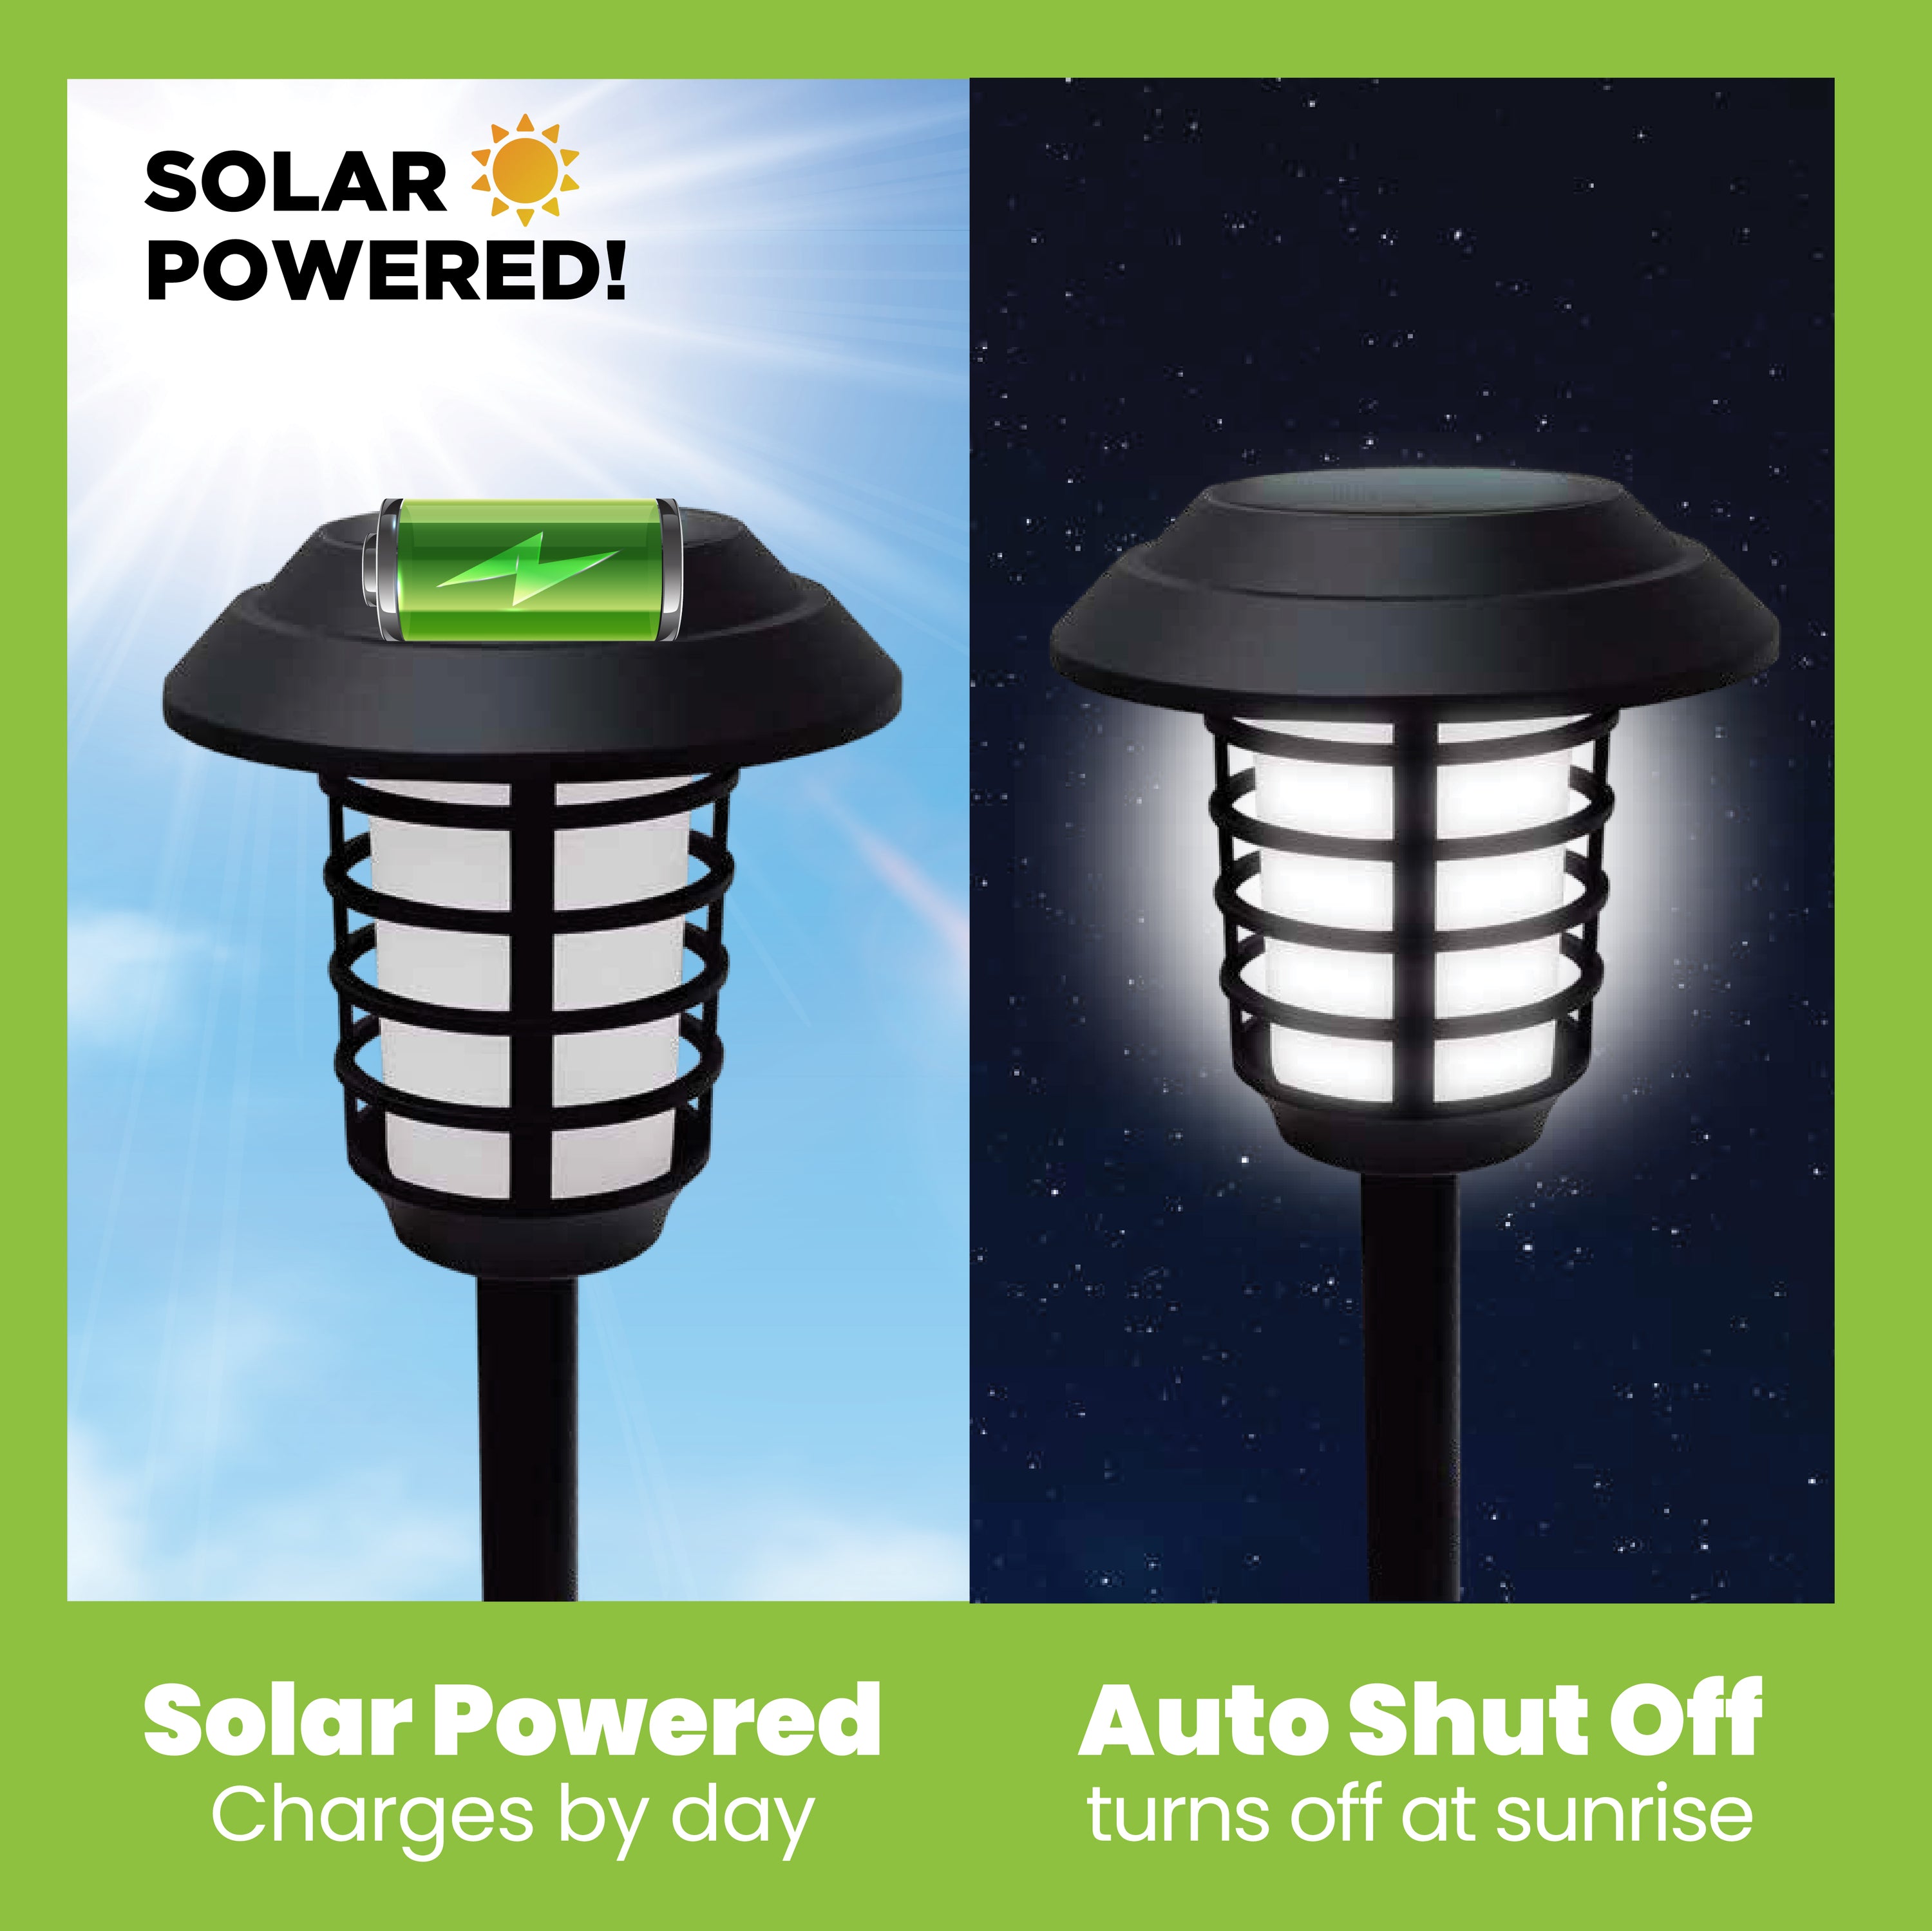 Bell + Howell Color Changing Solar Pathway Lights- 4 pack multipack